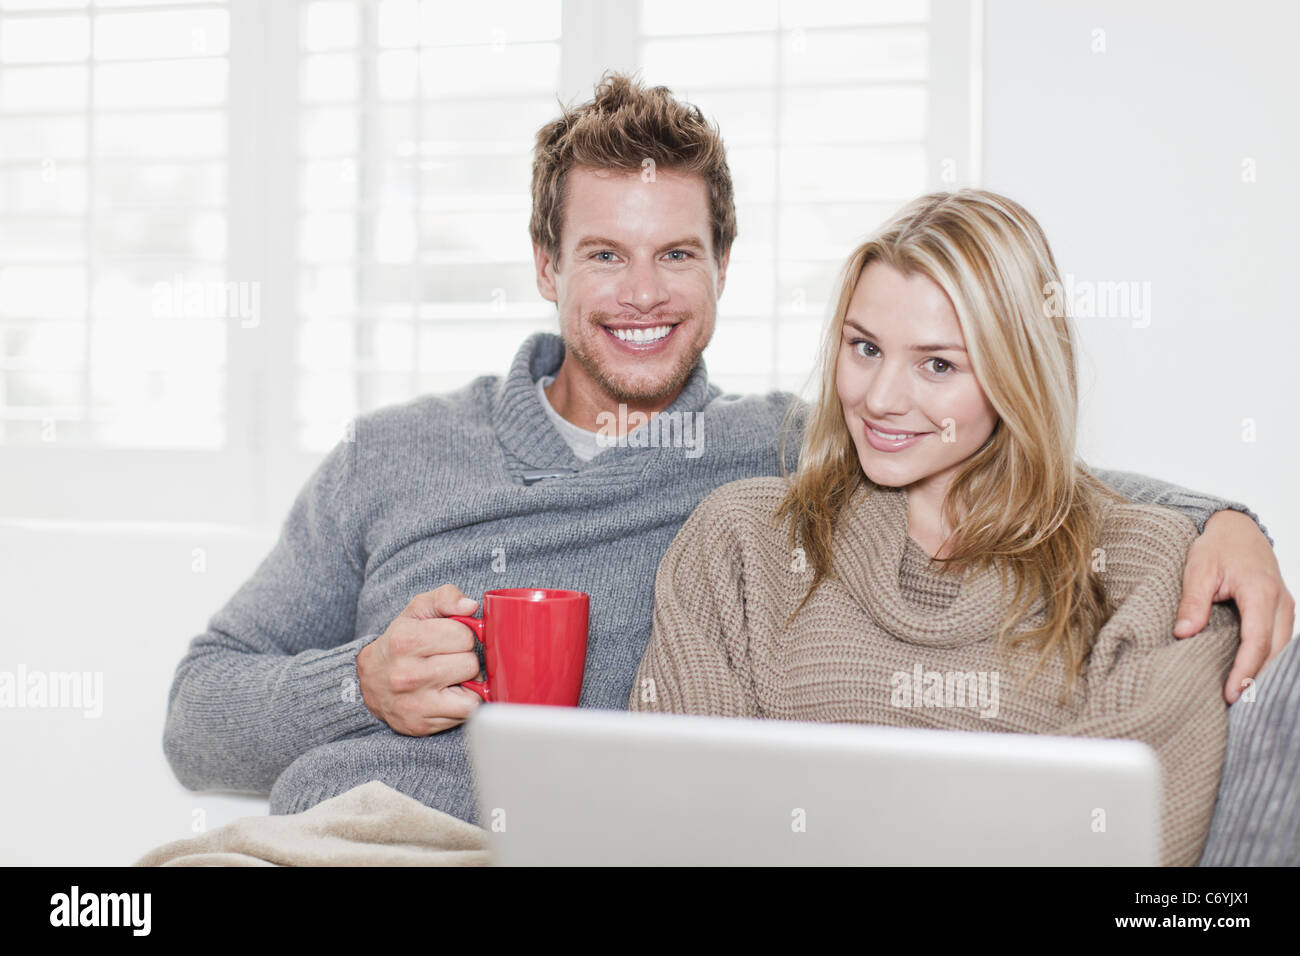 Couple relaxing together on couch Stock Photo